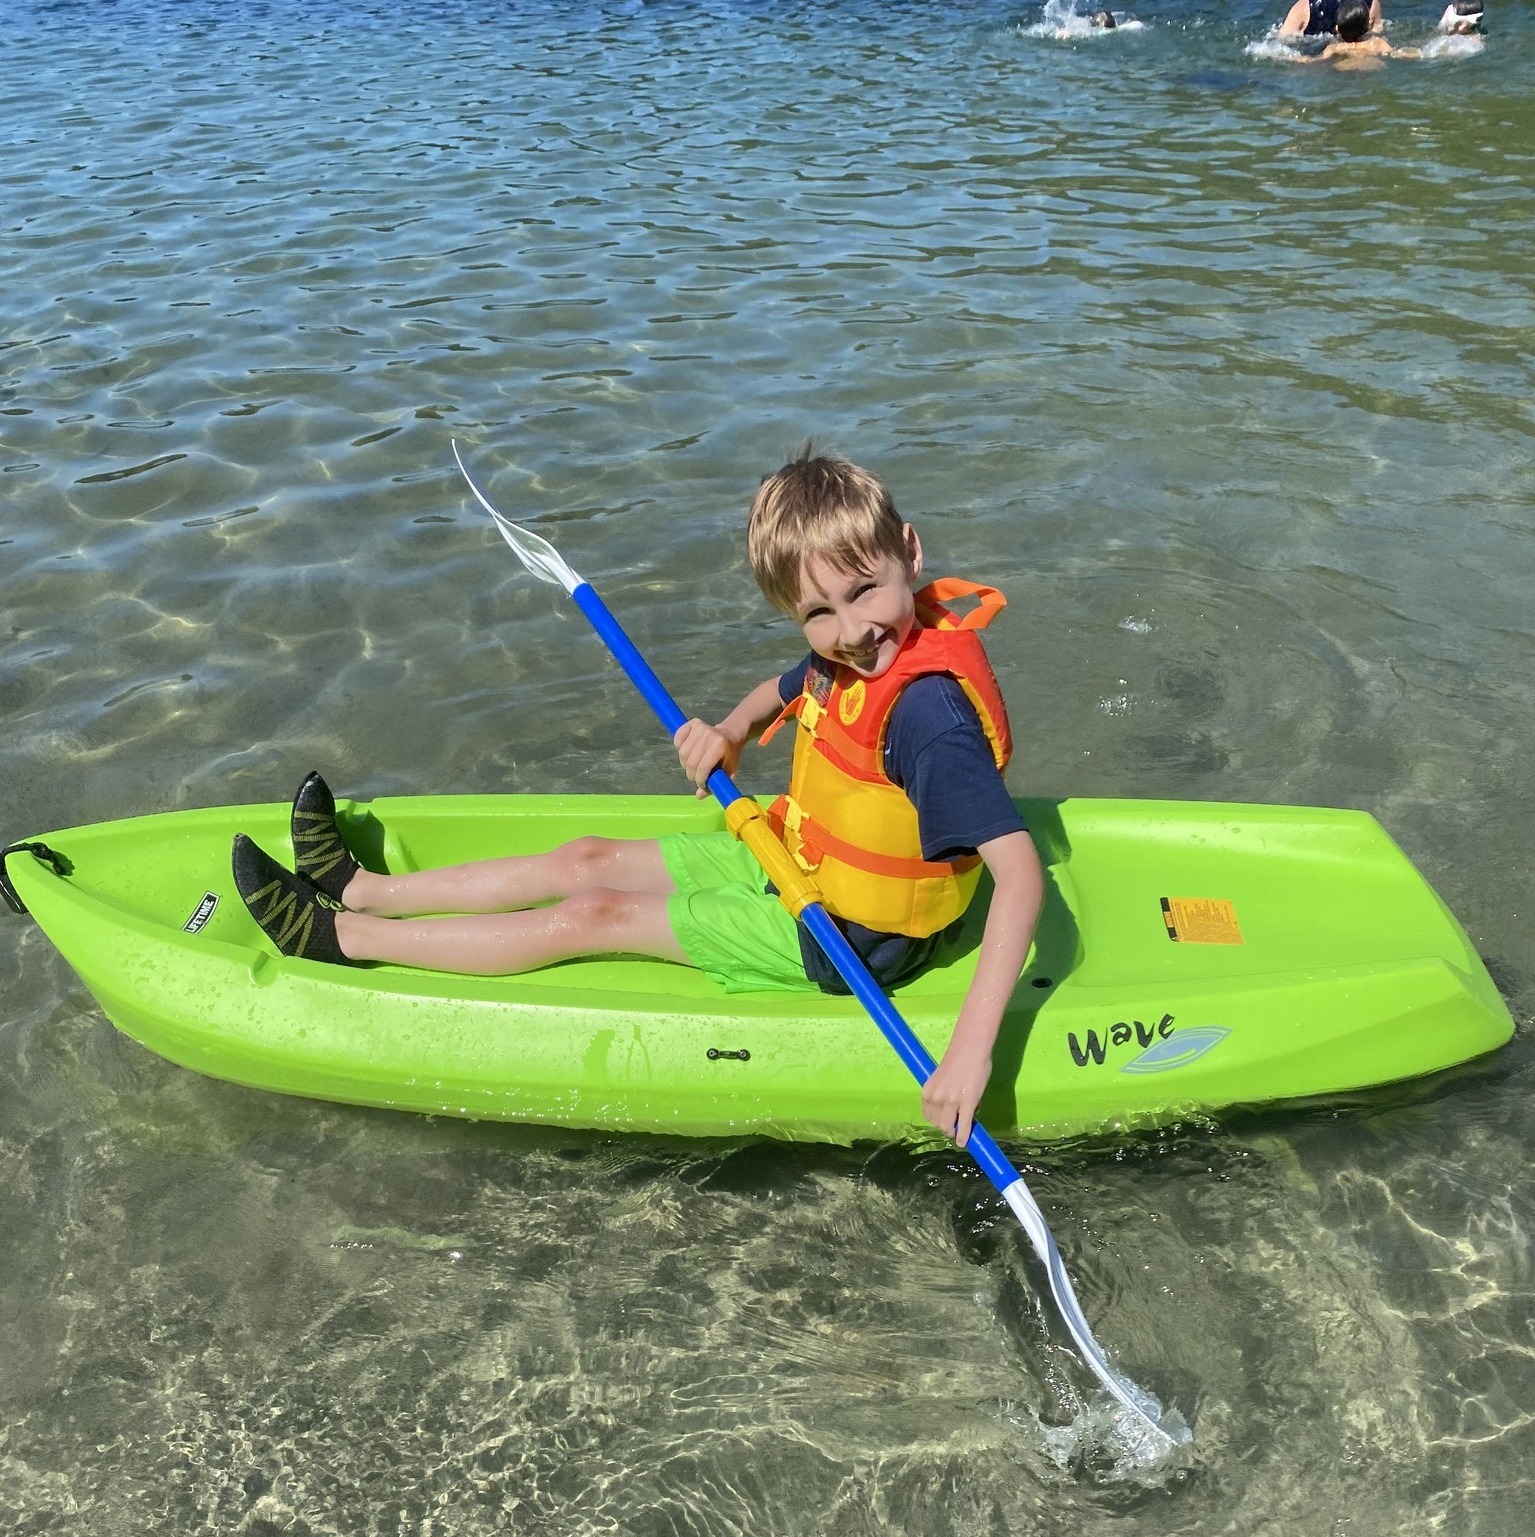 Kid getting ready to set sail on a kayak